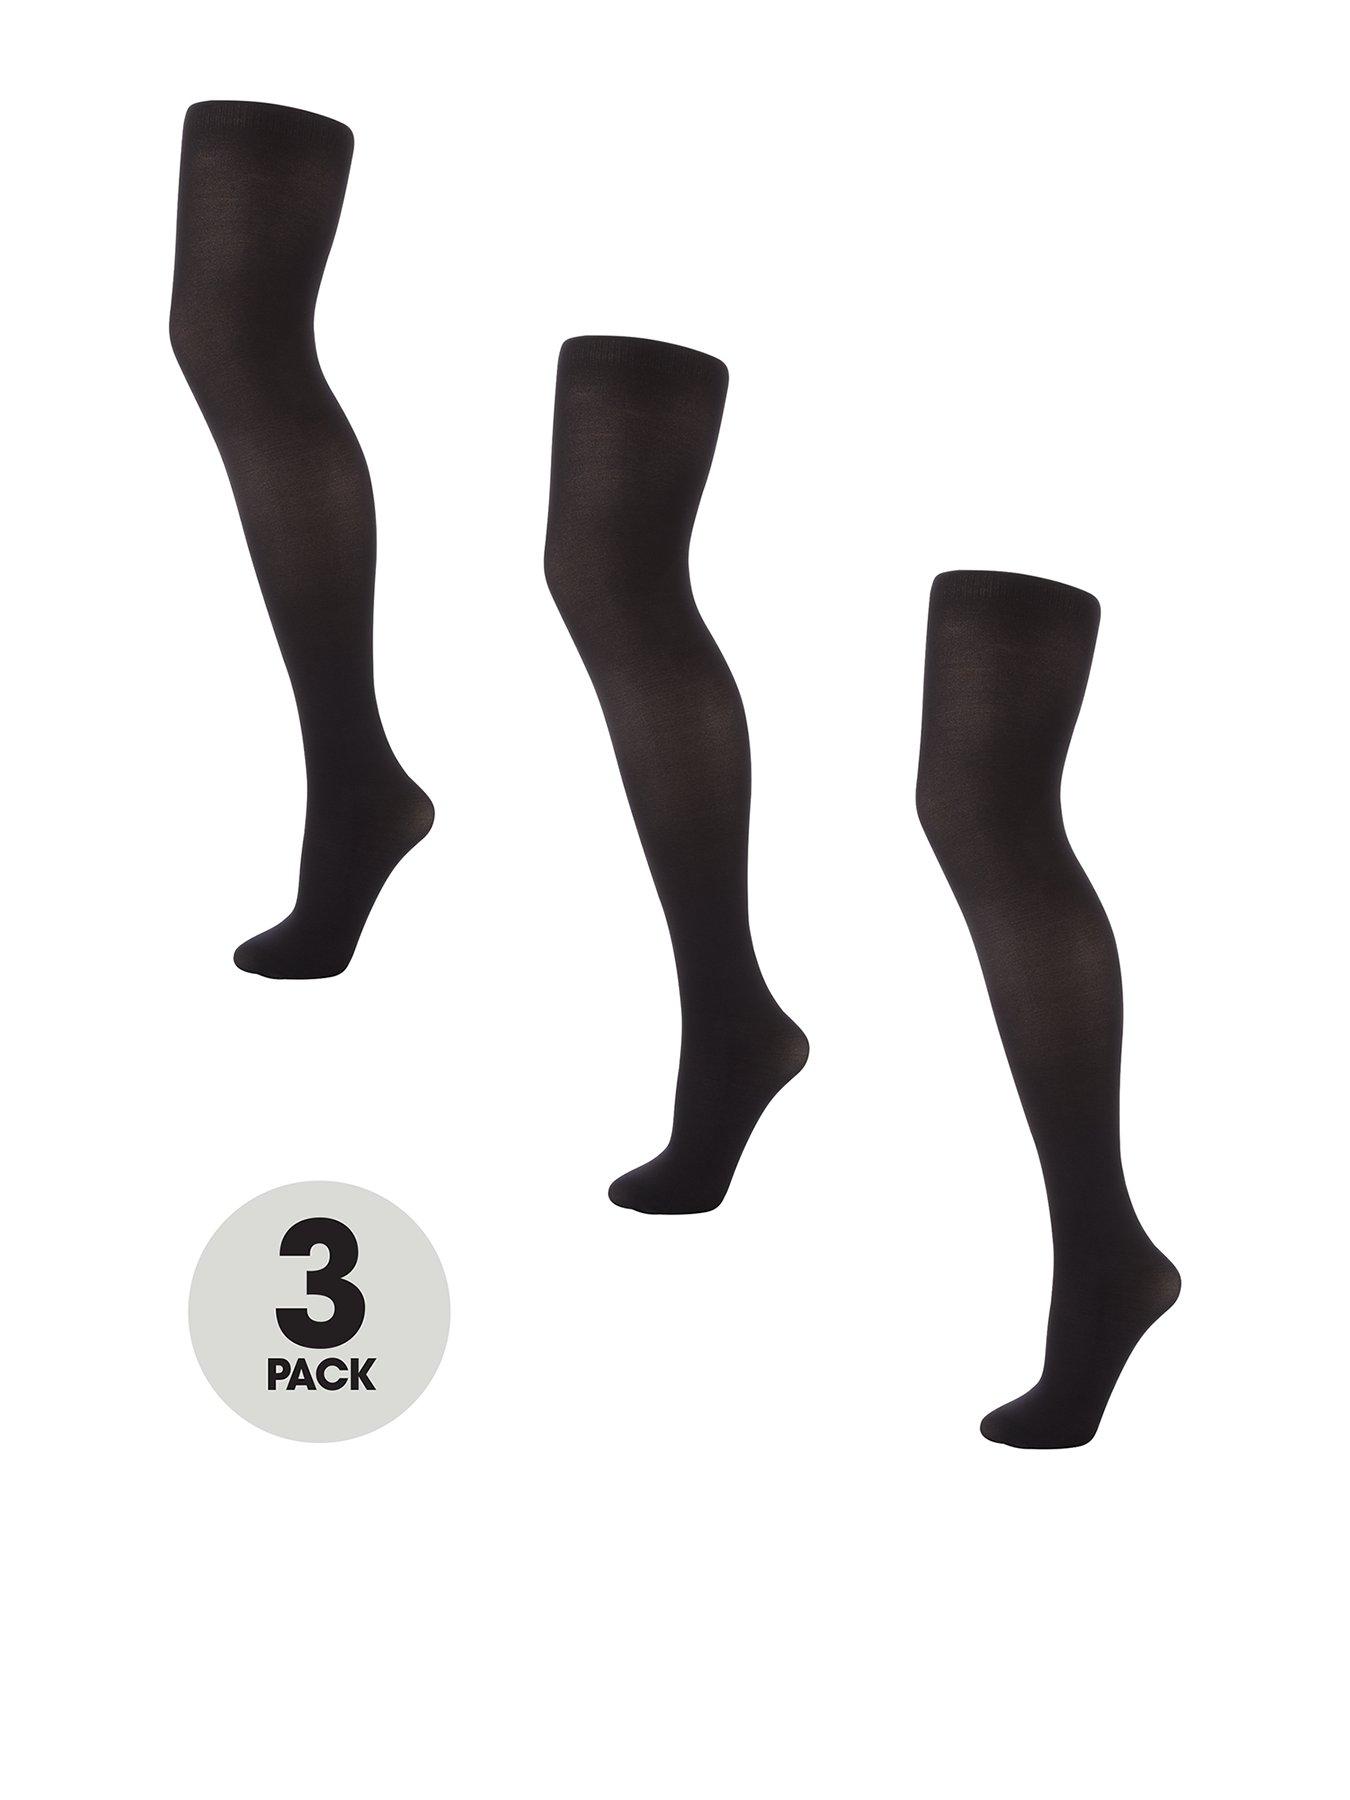 Black Lacy Tights Girls Med 4-6 Child Leg Stockings 100% Nylon New In  Package